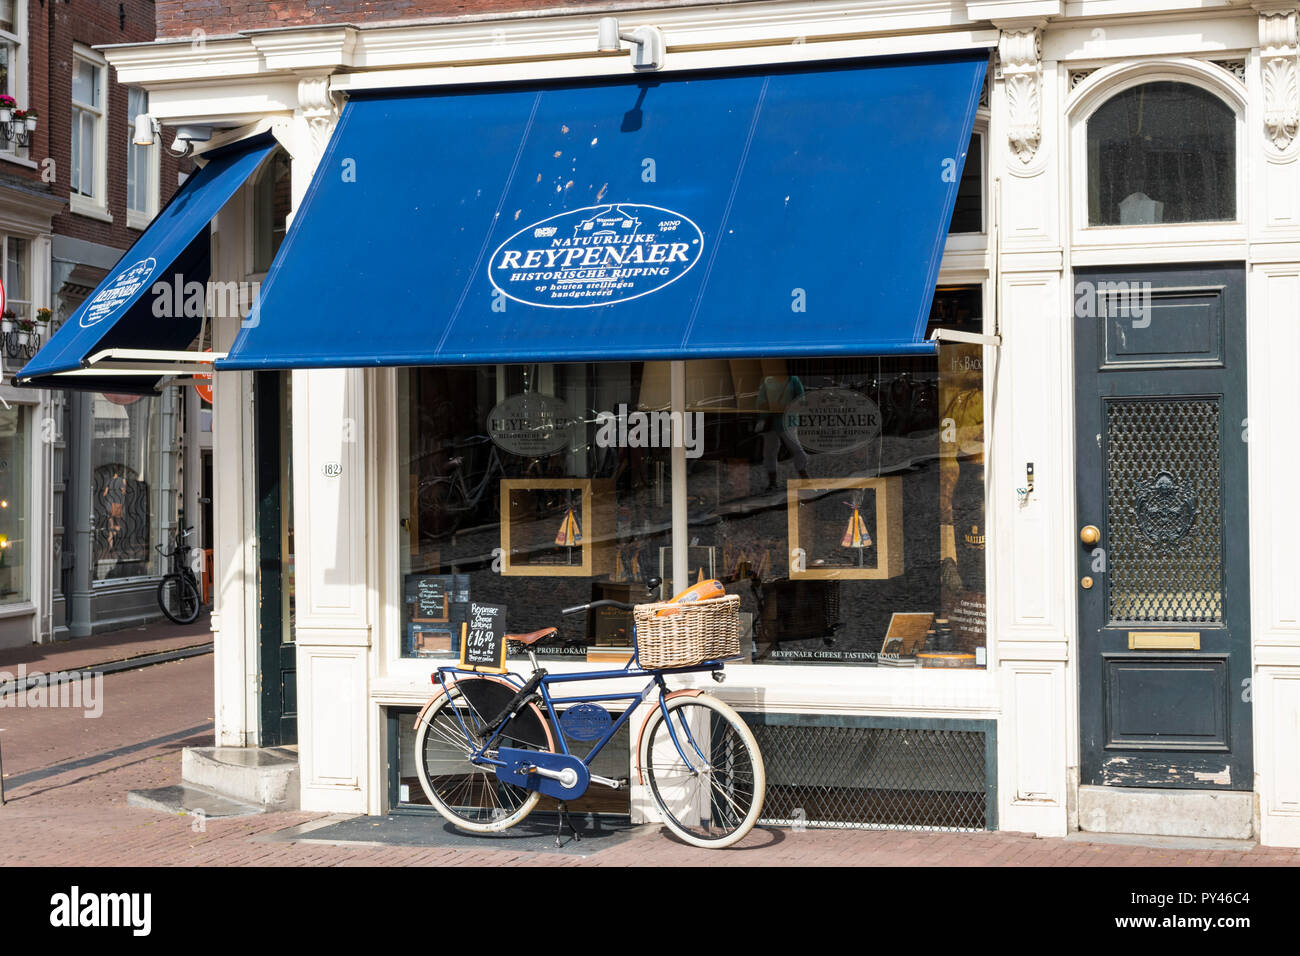 Amsterdam Reypenaer Tasting Room Singel Amsterdam Cheese tasting rooms Advertising bicycle propped up outside shop Holland The Netherlands EU Europe Stock Photo